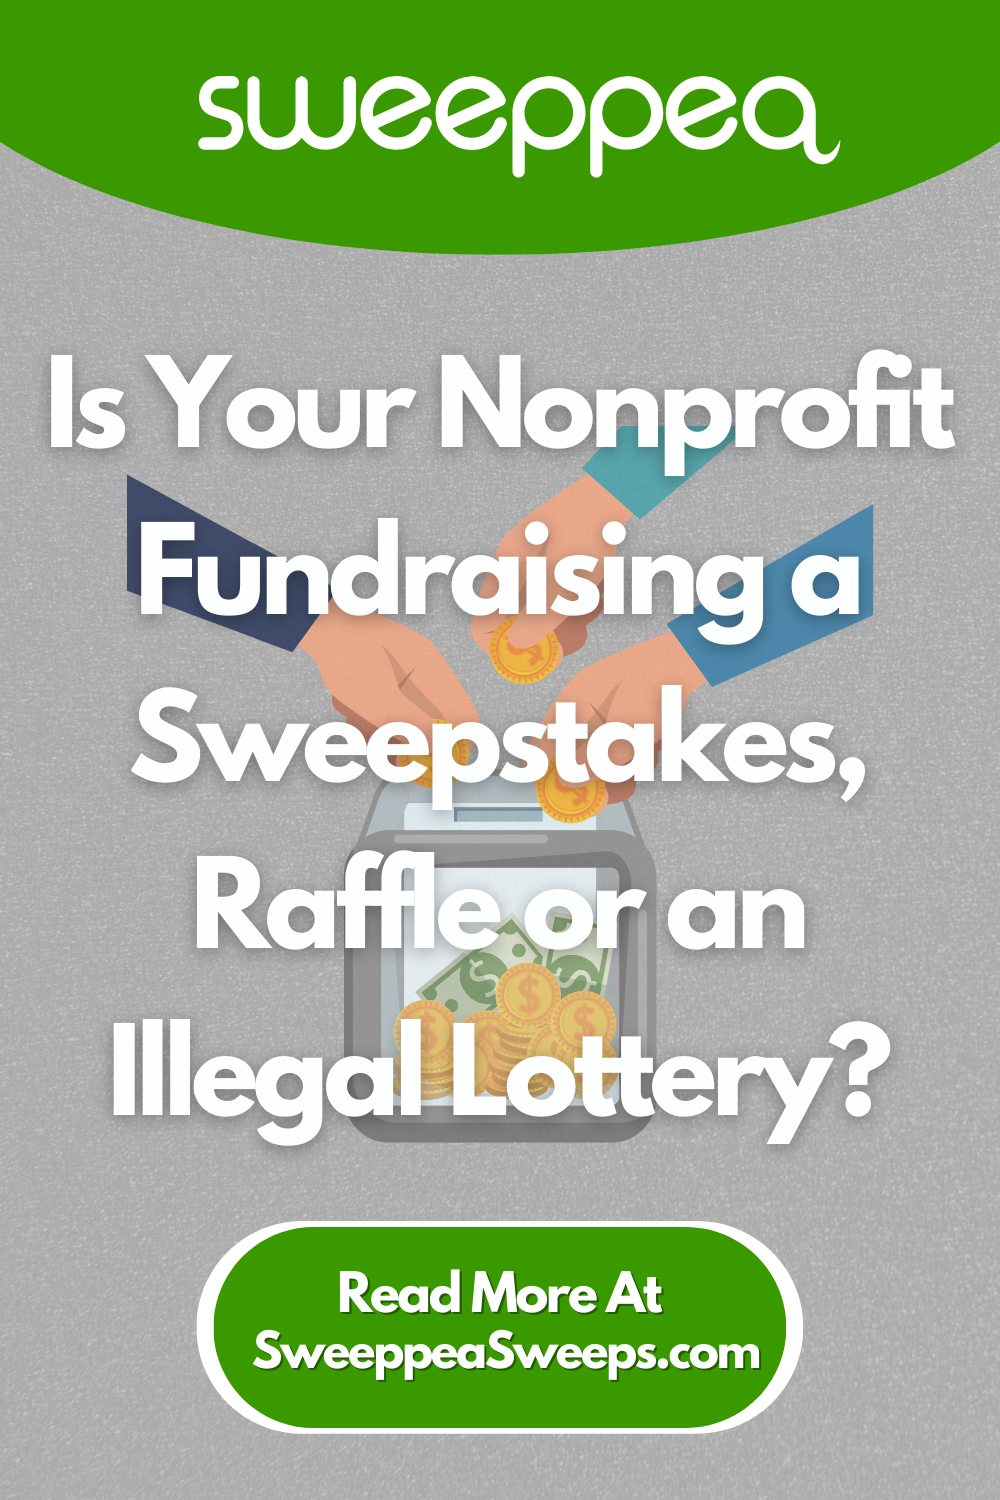 find out if your fundraising is a sweepstakes or illegal lottery